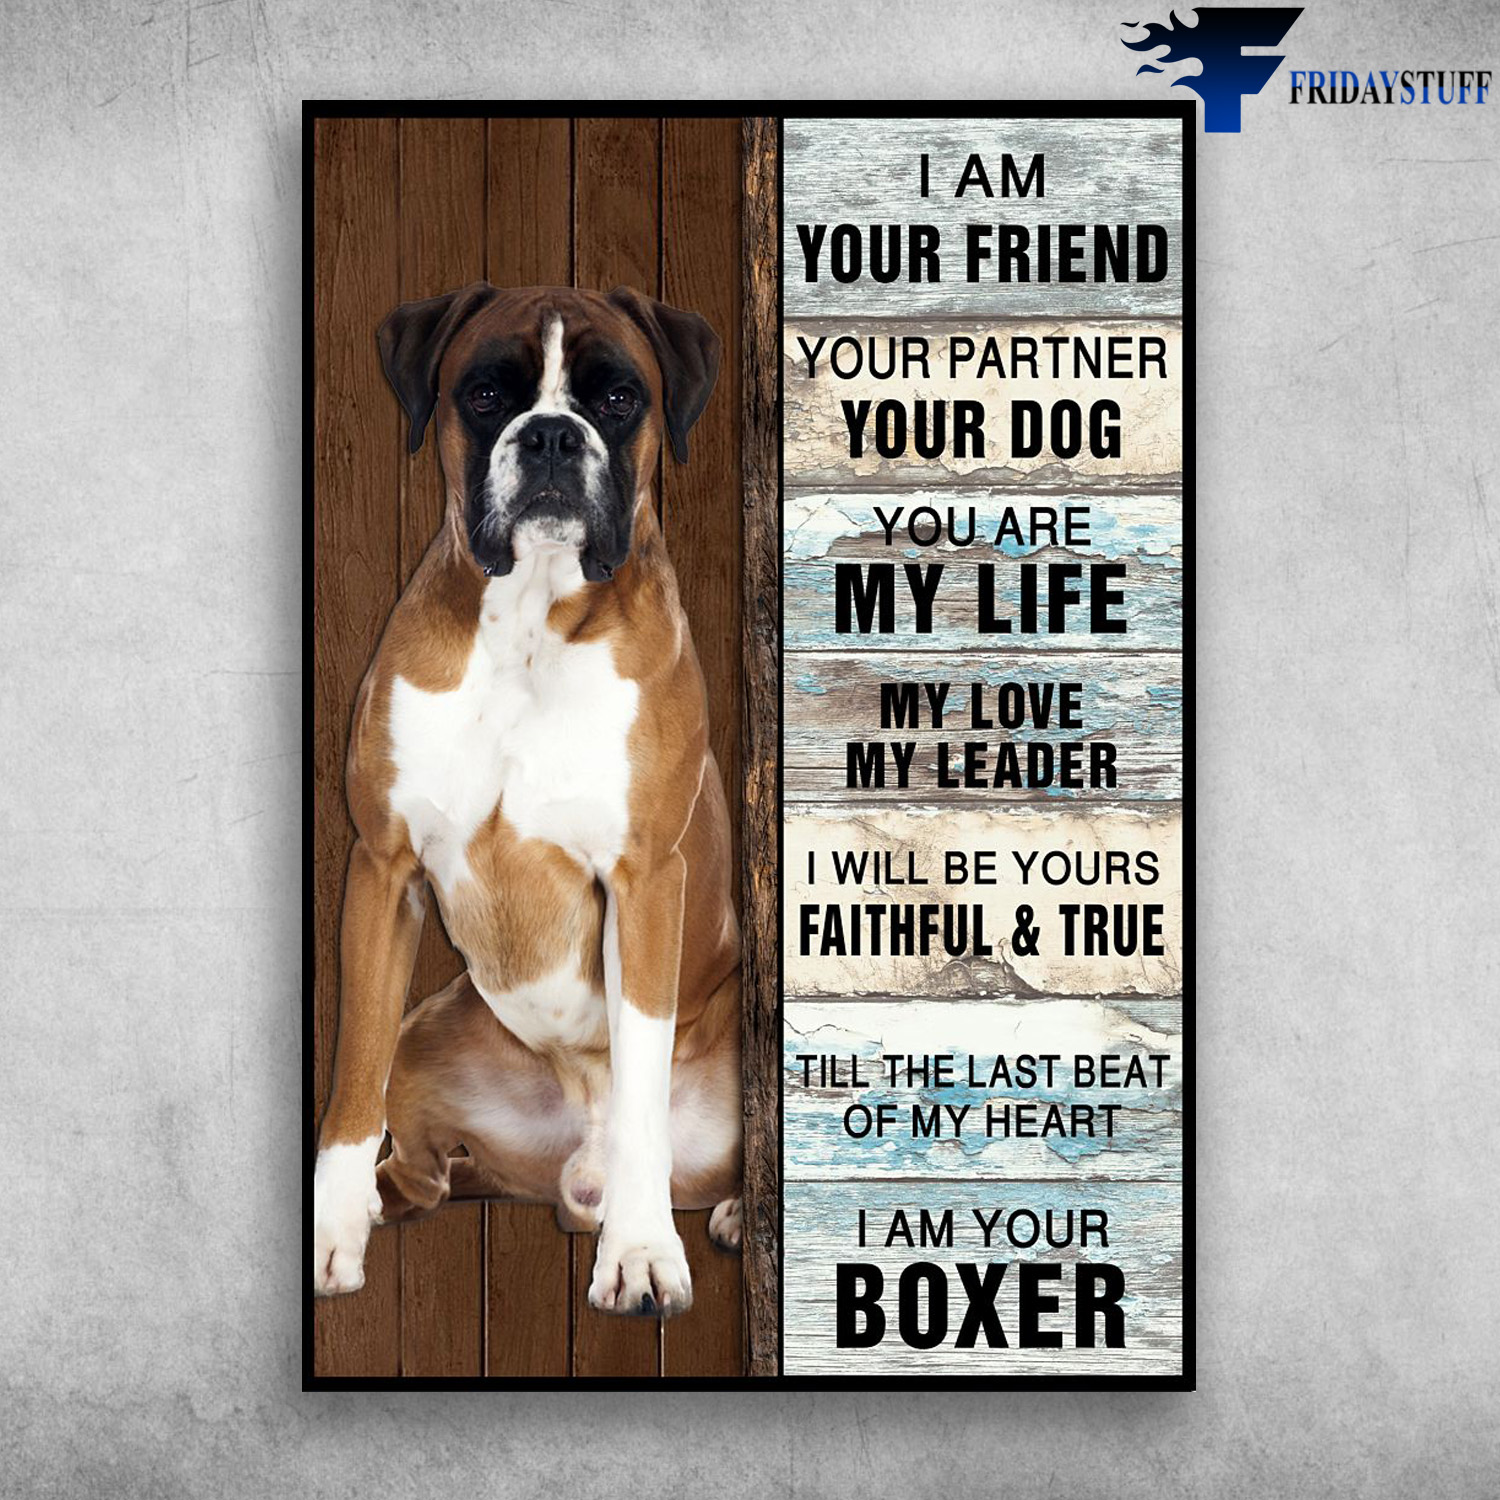 Boxer Dog - I Am Your Friend, Your Partner, Your Dog, You Are My Life, My Love, My Leader, I Will Be Yours, Faithful And True, Till The Last Beat Of My Heart, I Am Your Boxer